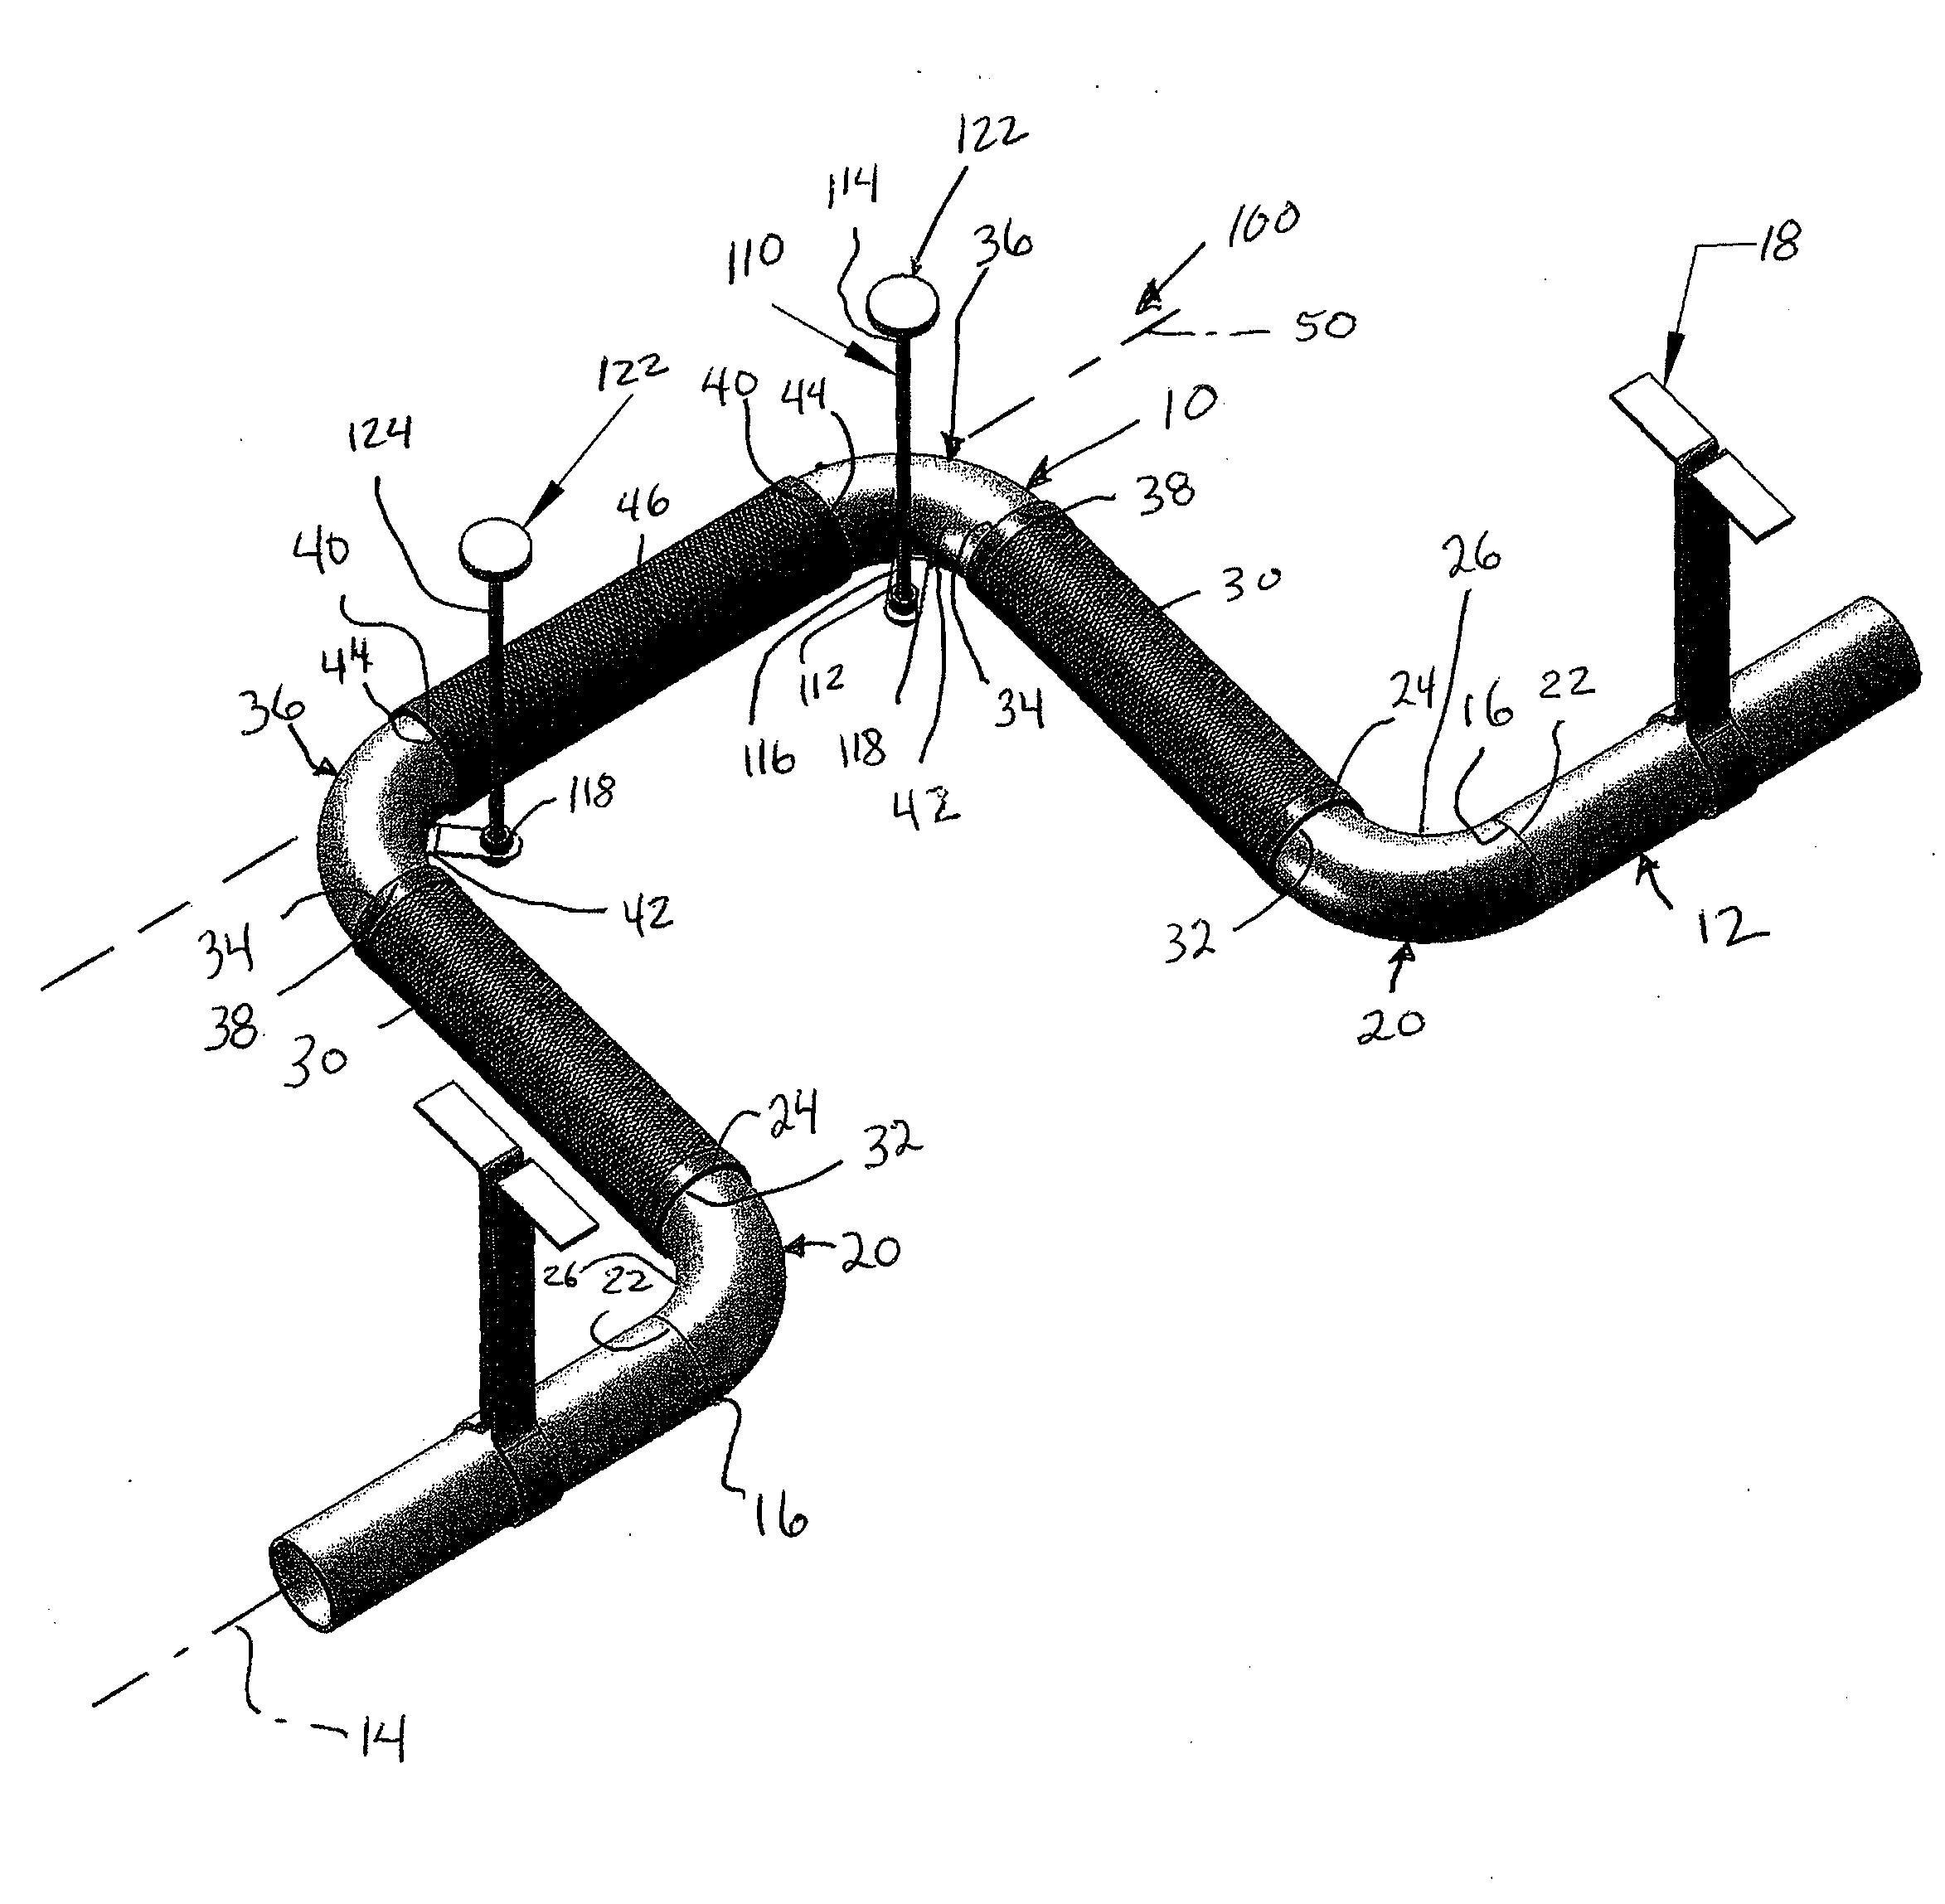 Support system for flexible pipe